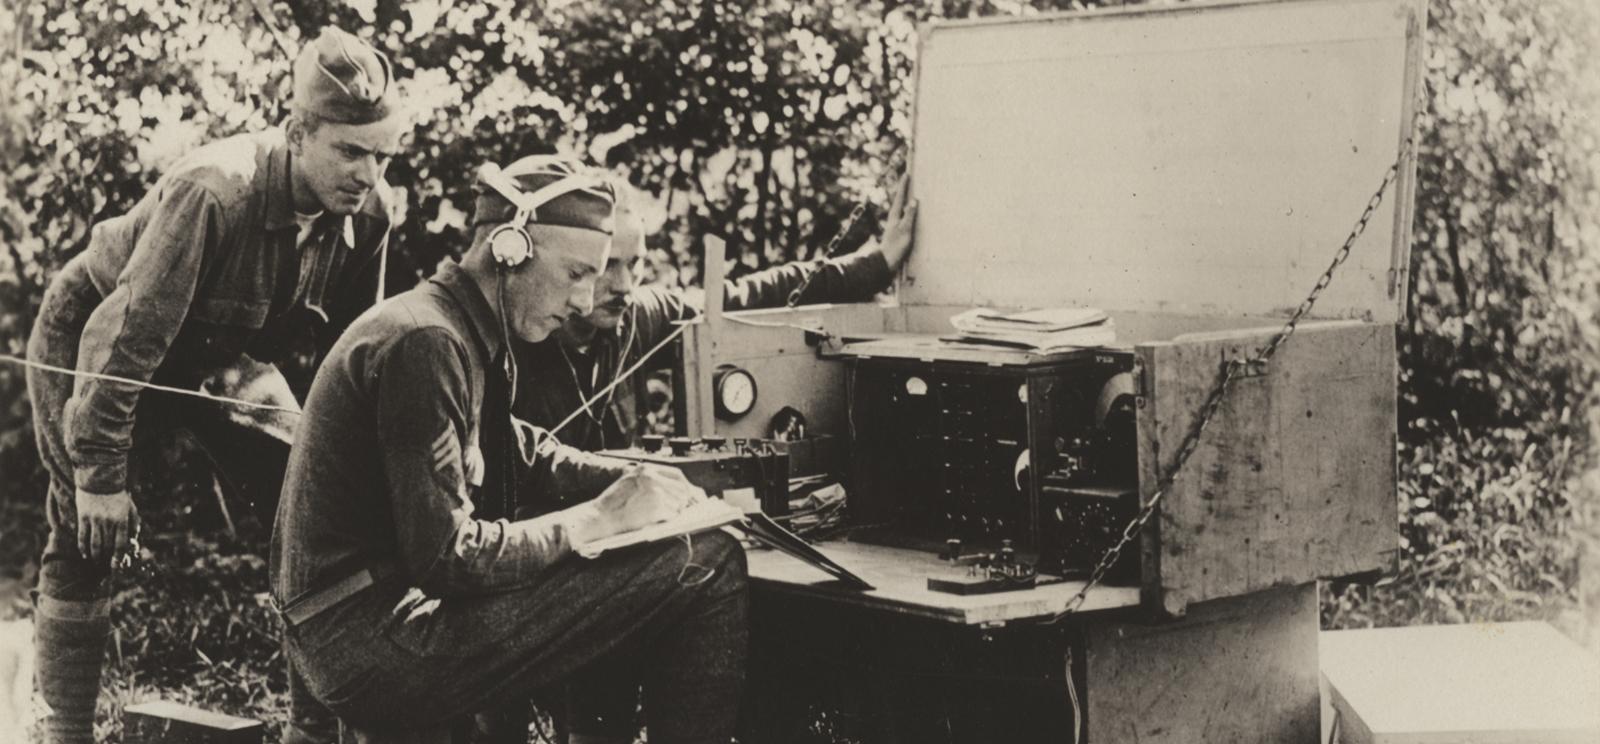 Sepia photograph of a WWI soldier seated at a field radio station wearing headphones and writing something on paper. Two soldiers lean over his shoulder.